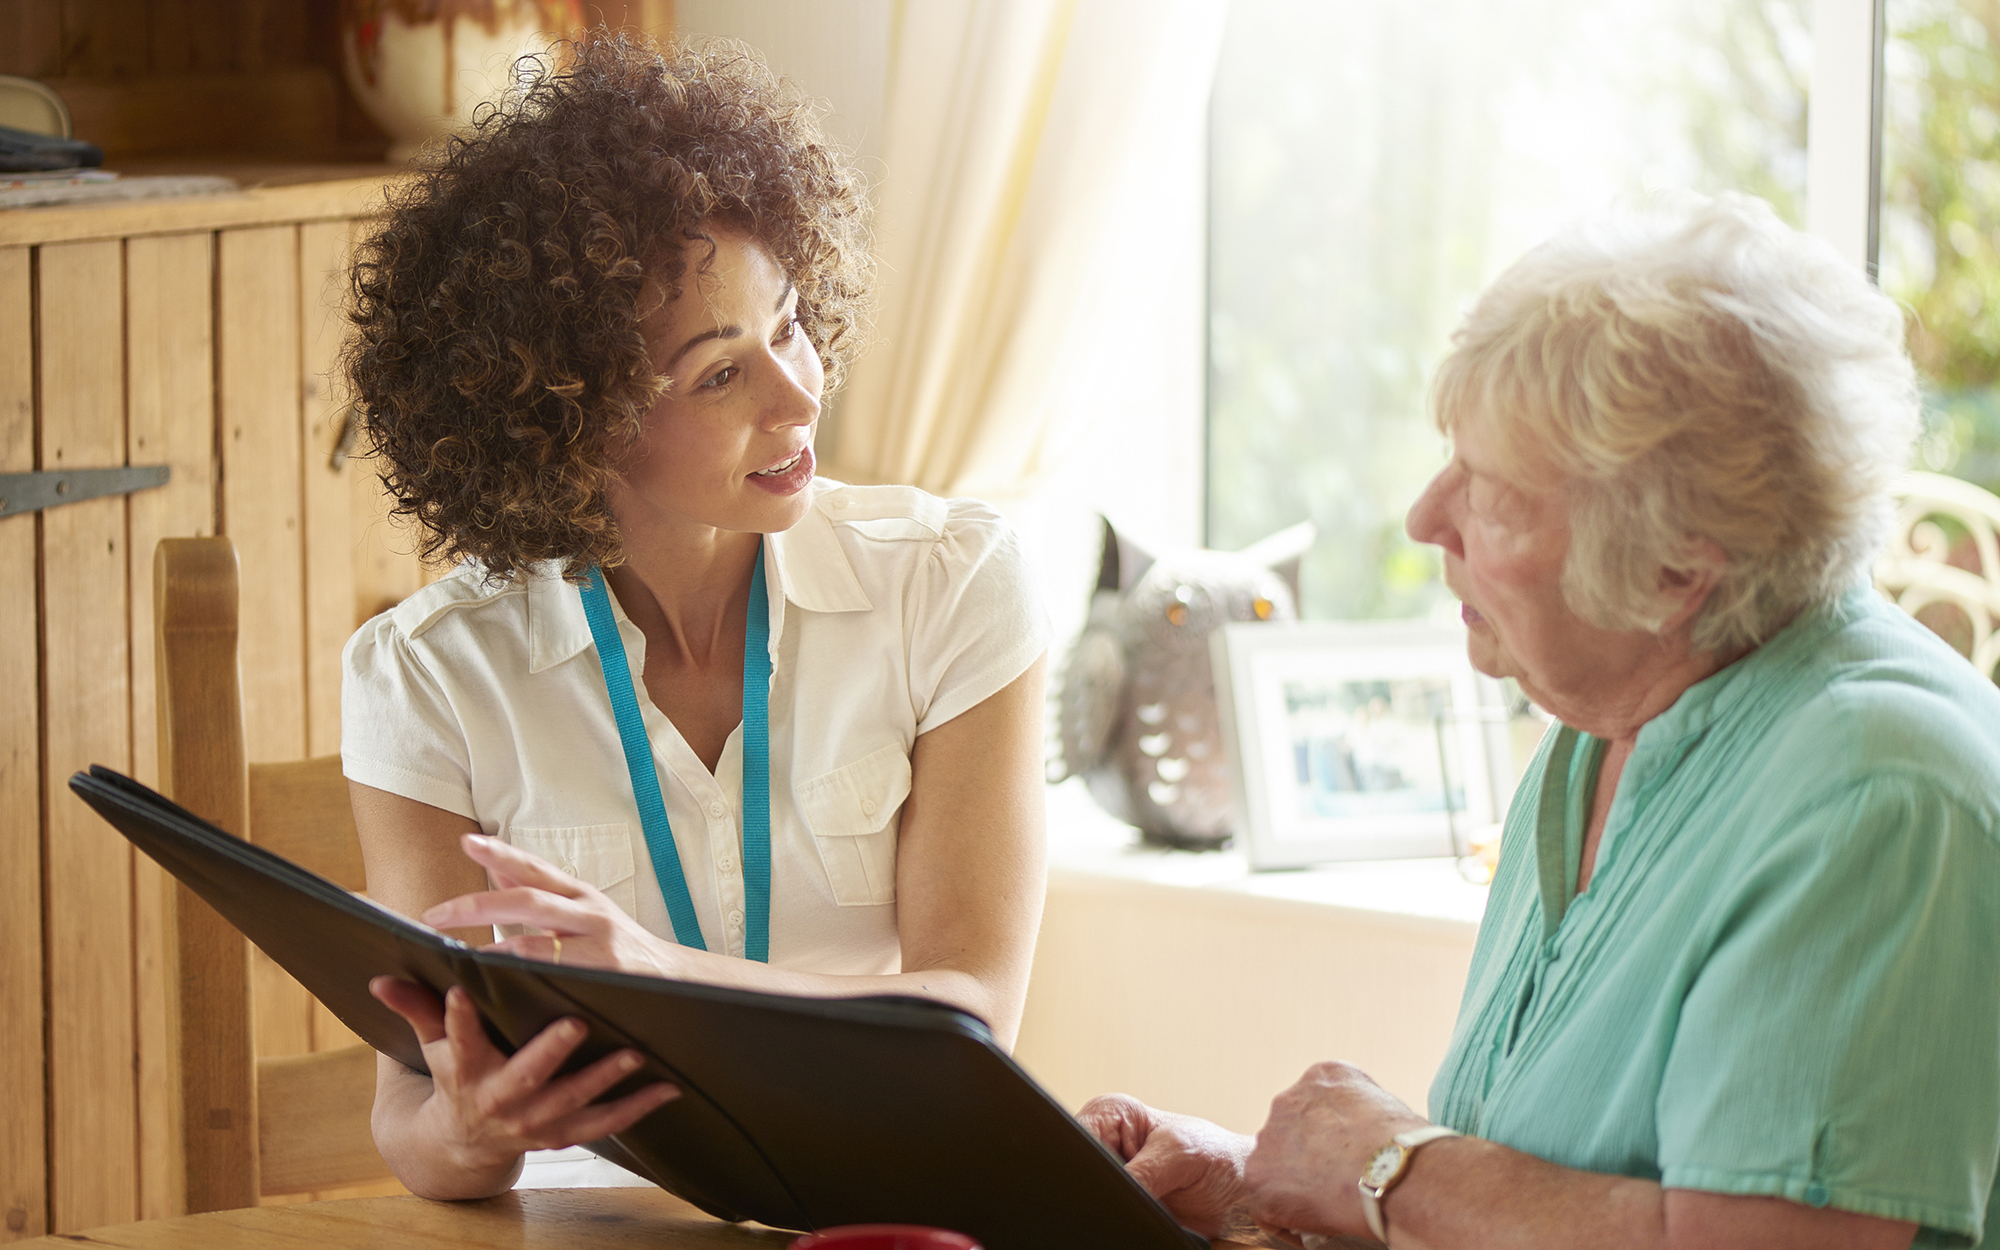 A Genetic counselor working with an older patient on her health journey.